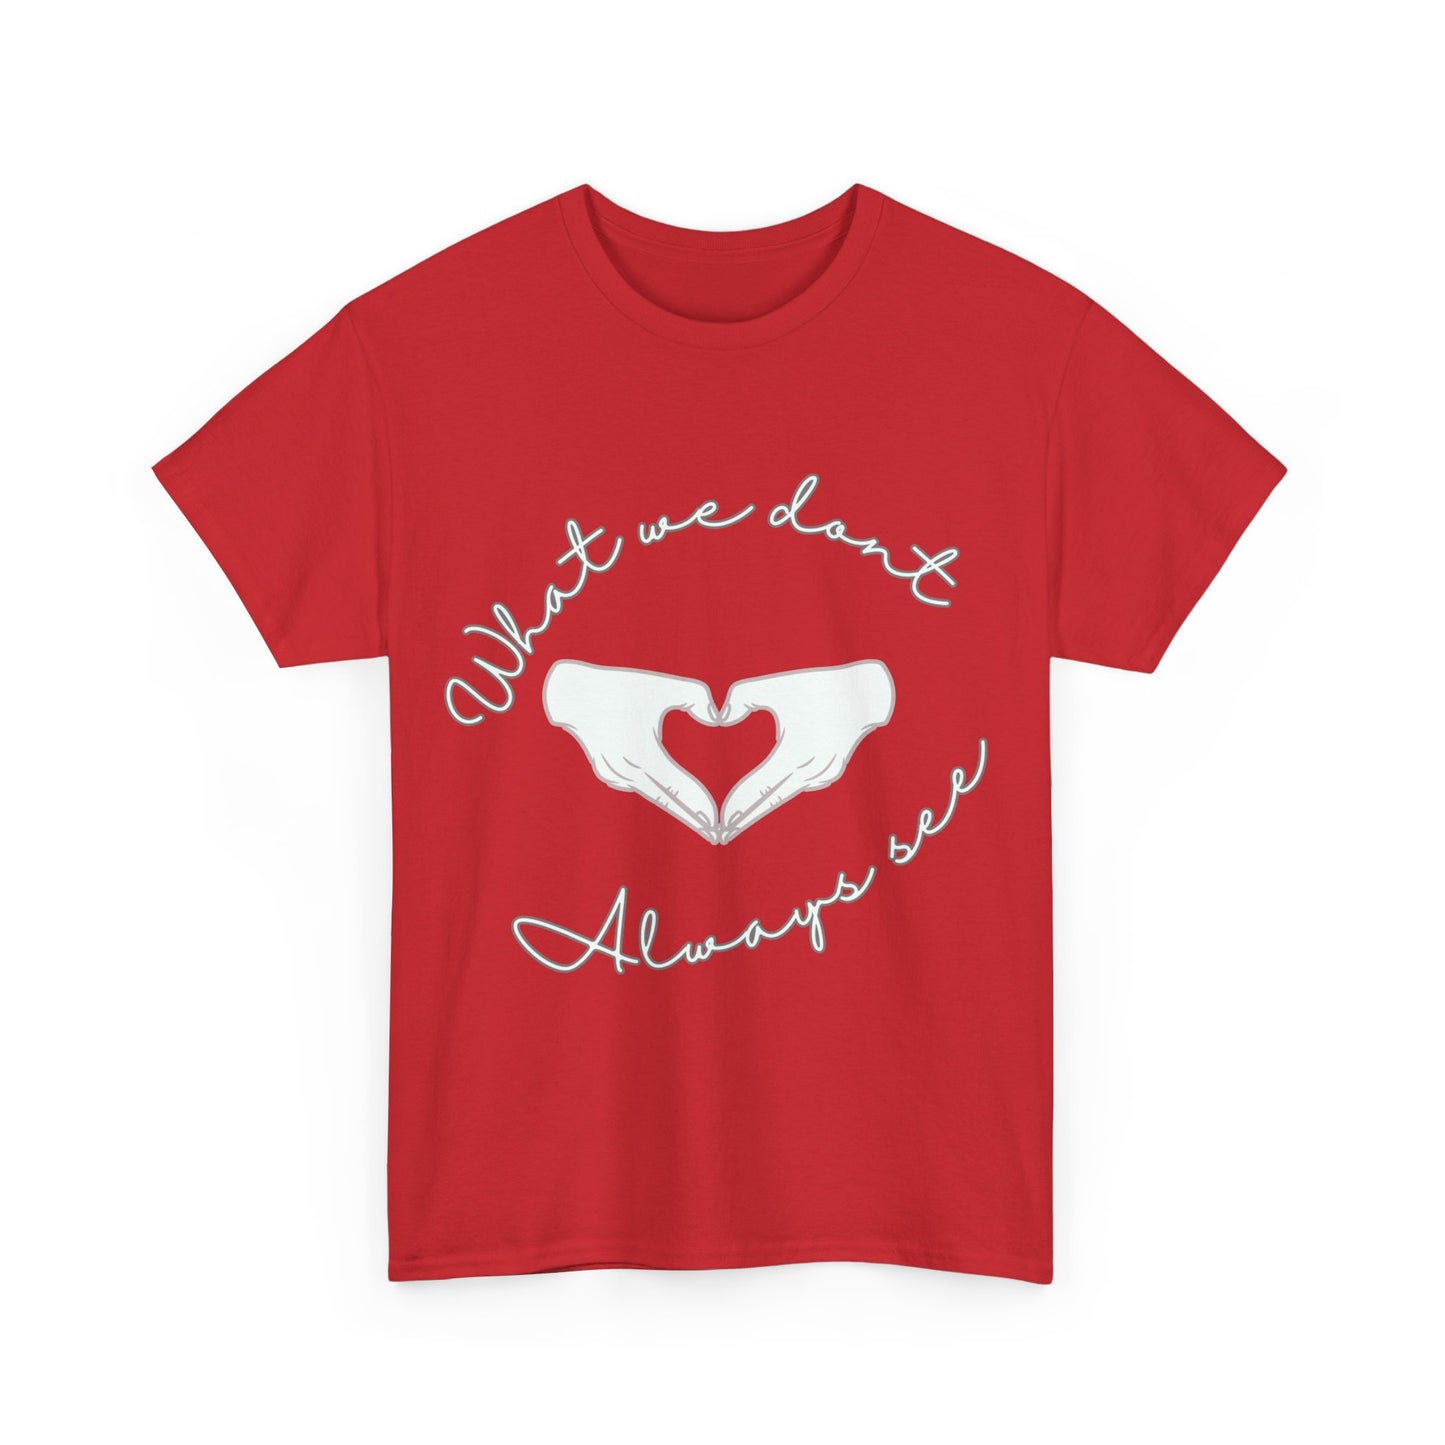 "What We Don't Always See" Heart Hands Tee